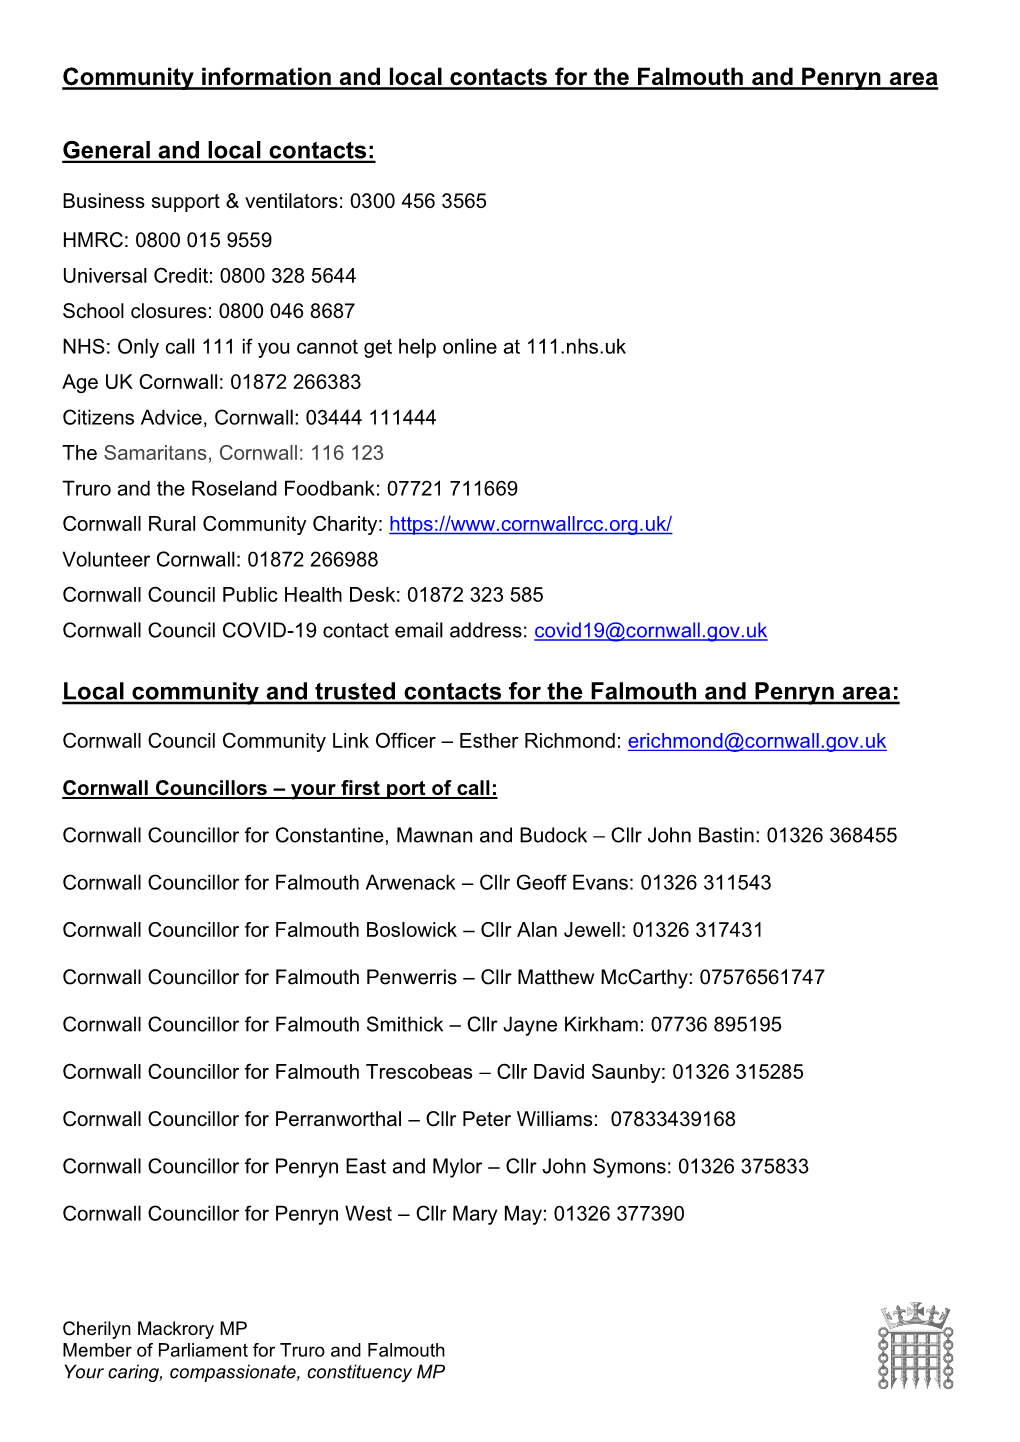 Community Information and Local Contacts for the Falmouth and Penryn Area